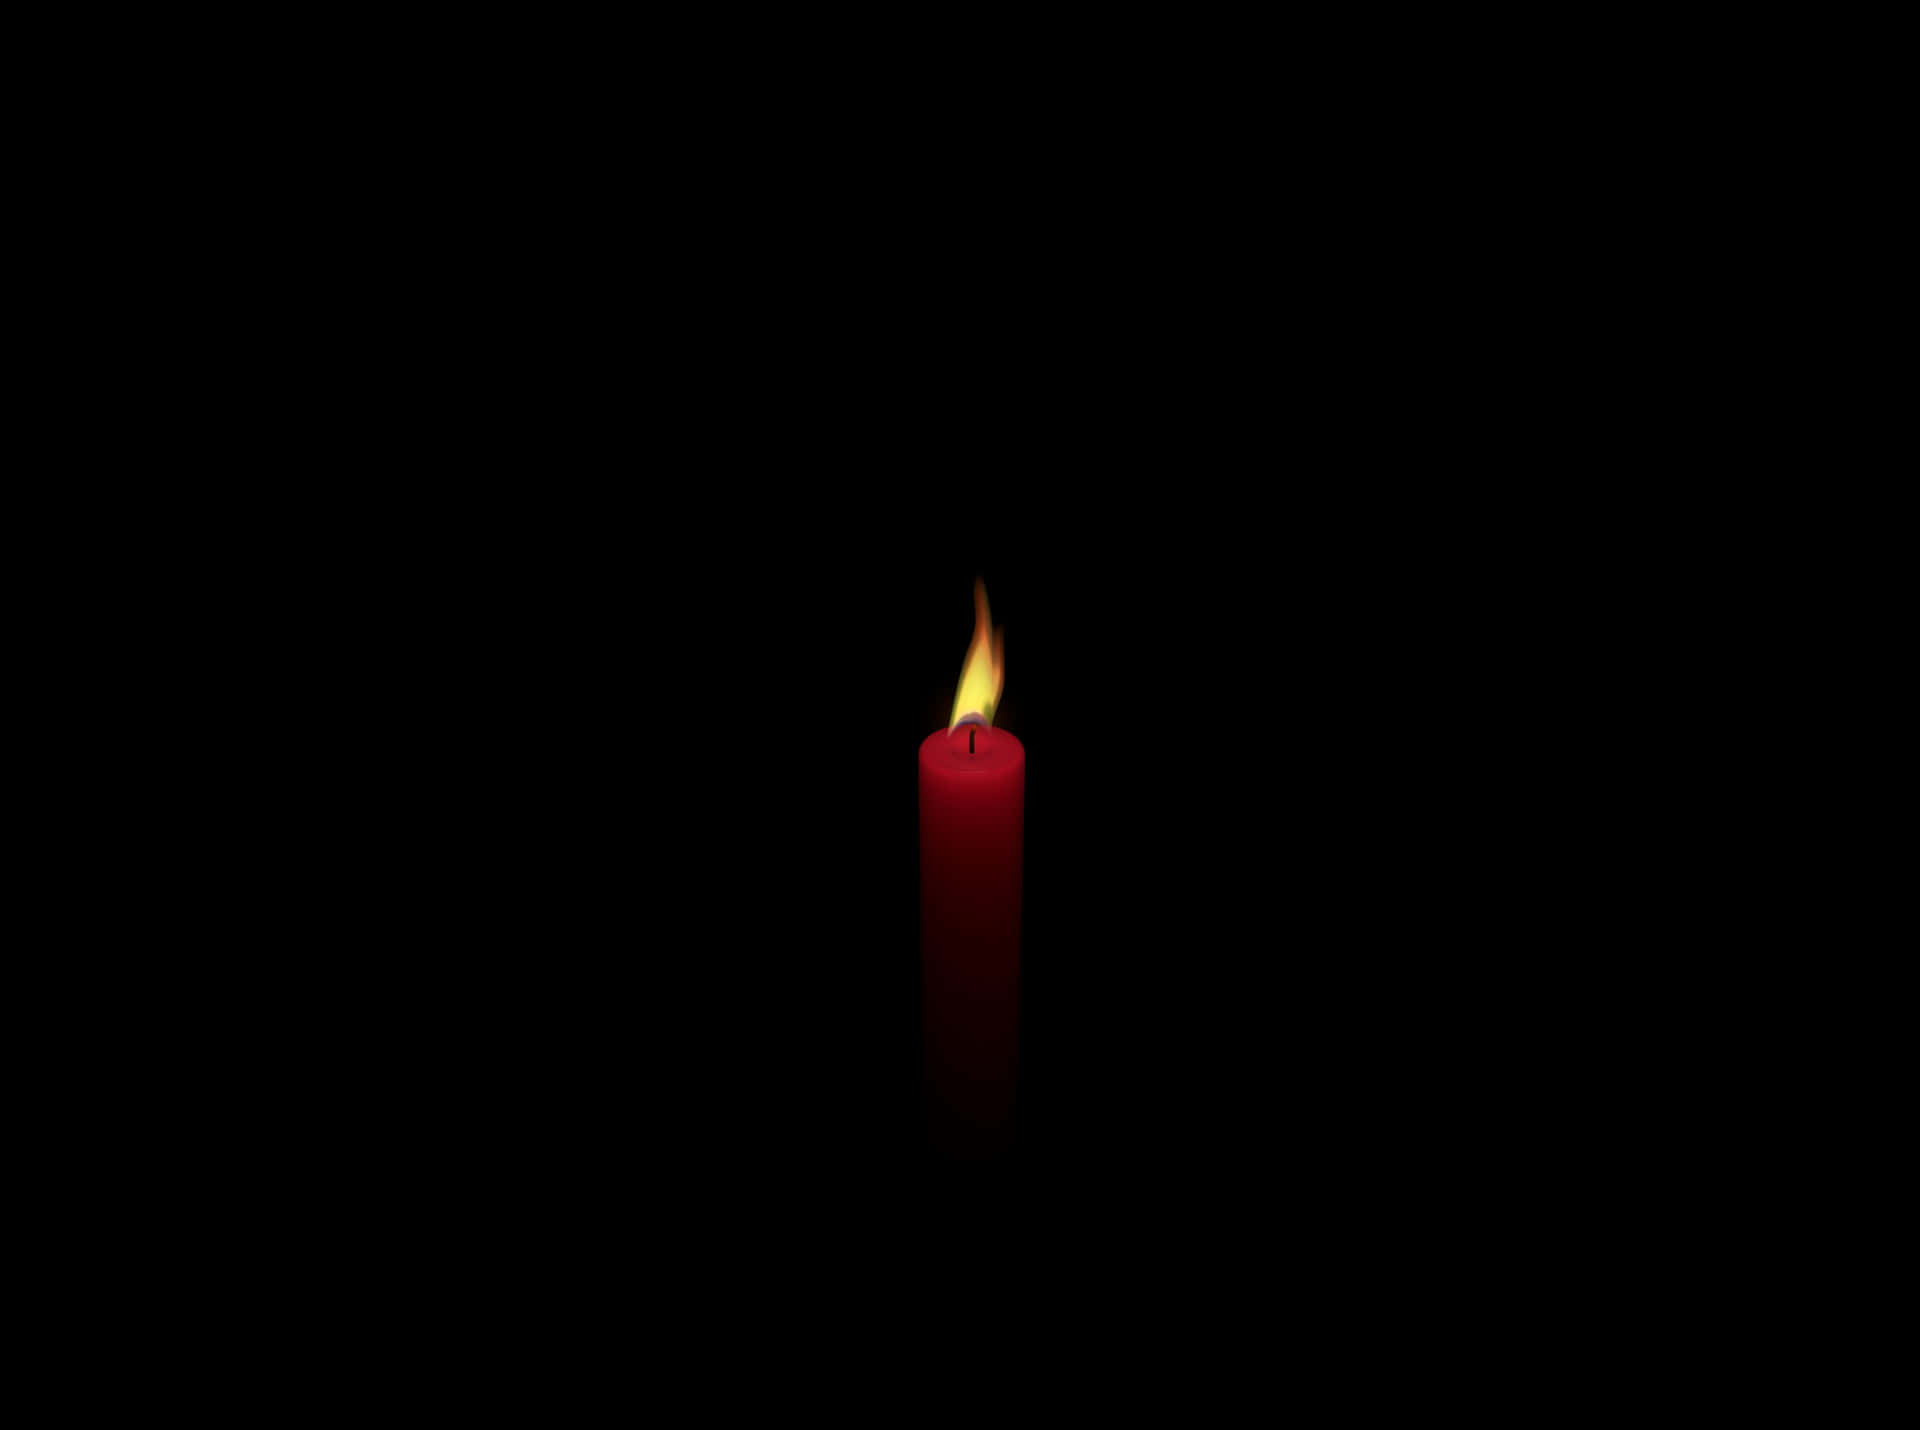 A Candle Is Lit In The Dark